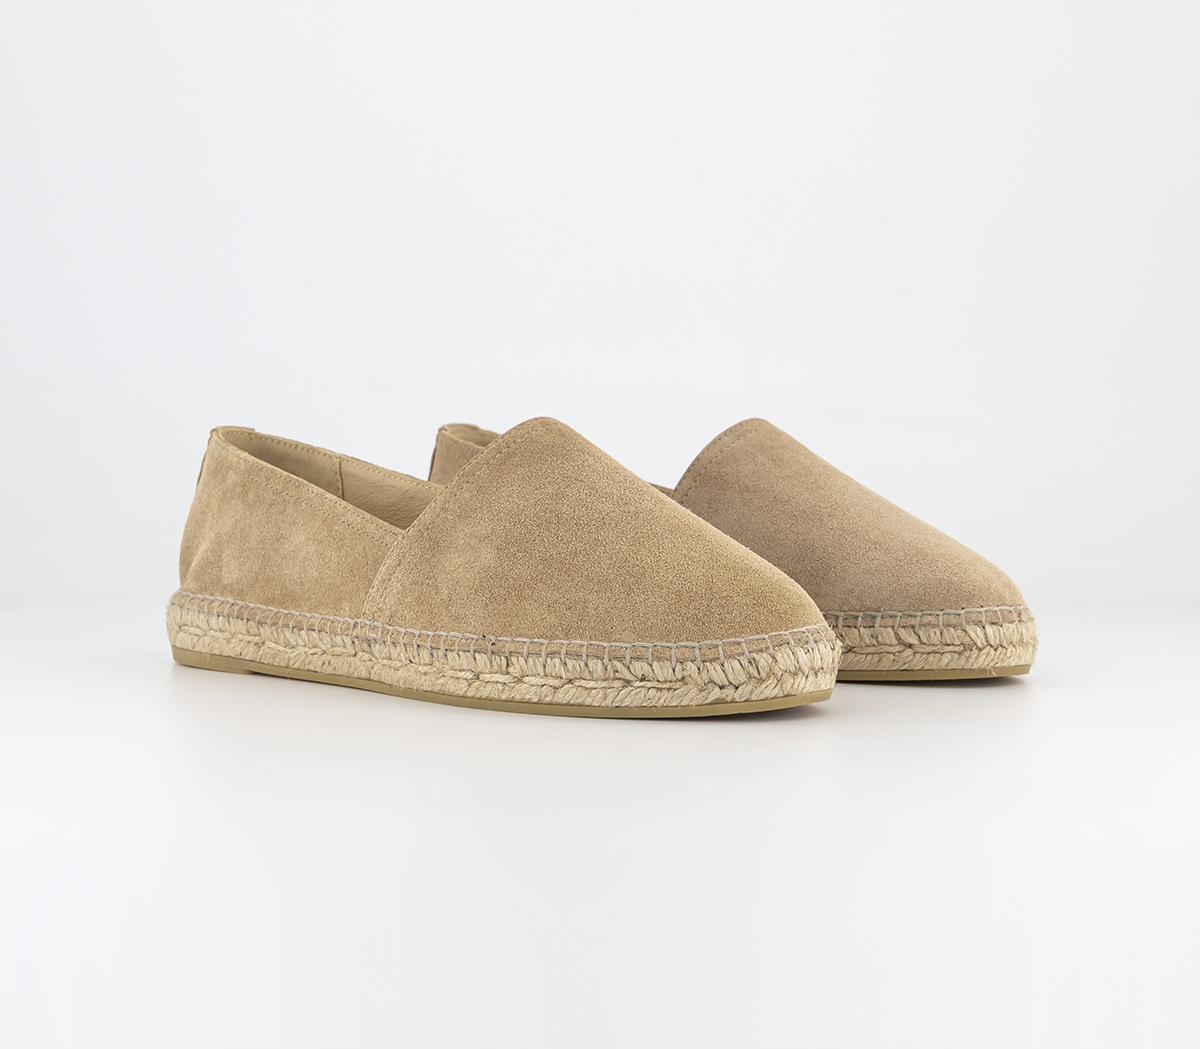 Gaimo For Office Kids Camping Slip On Espadrilles Tan Suede, 3